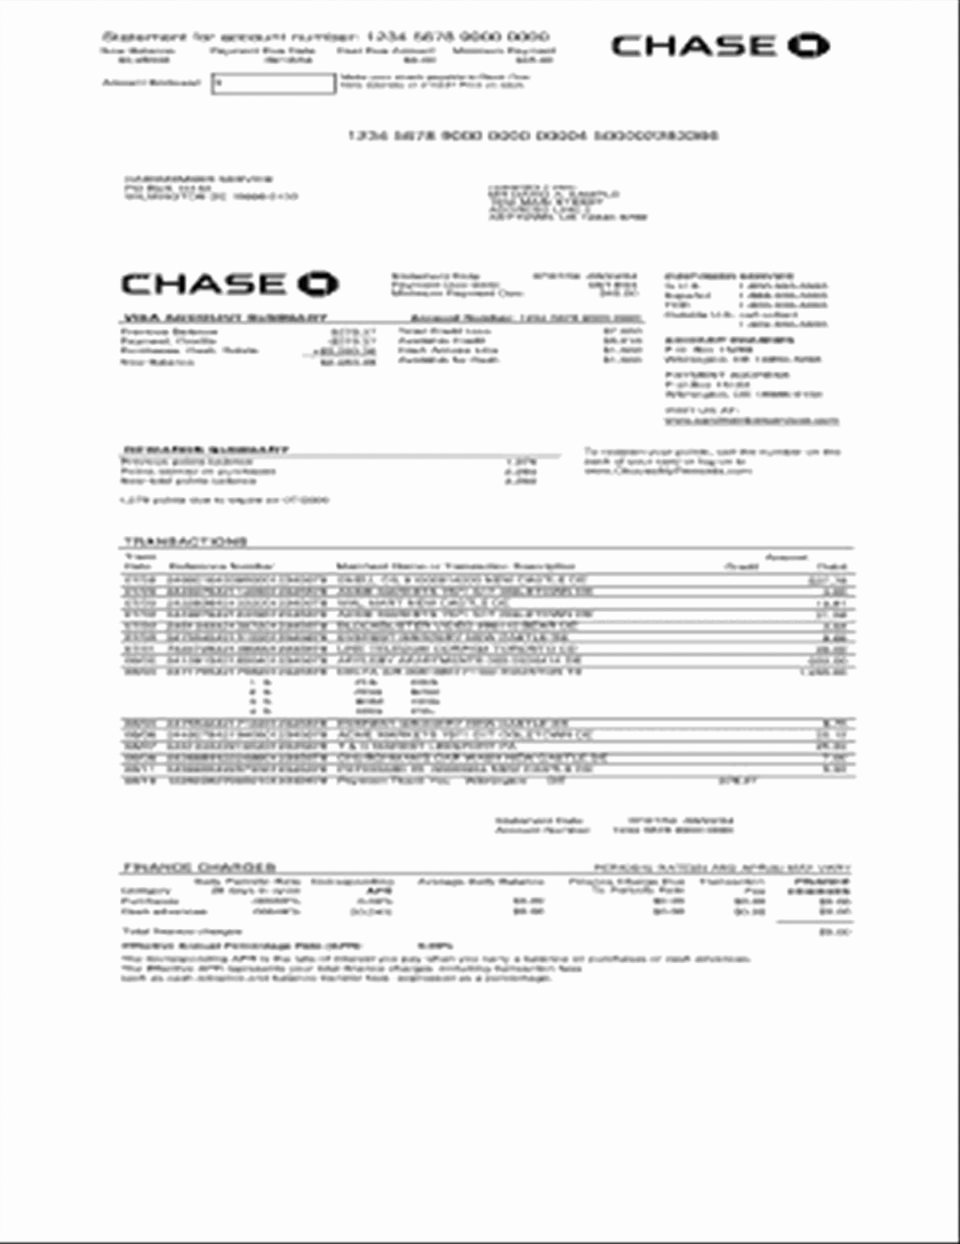 Fake Bank Statement Template New Chase Bank Statement Template